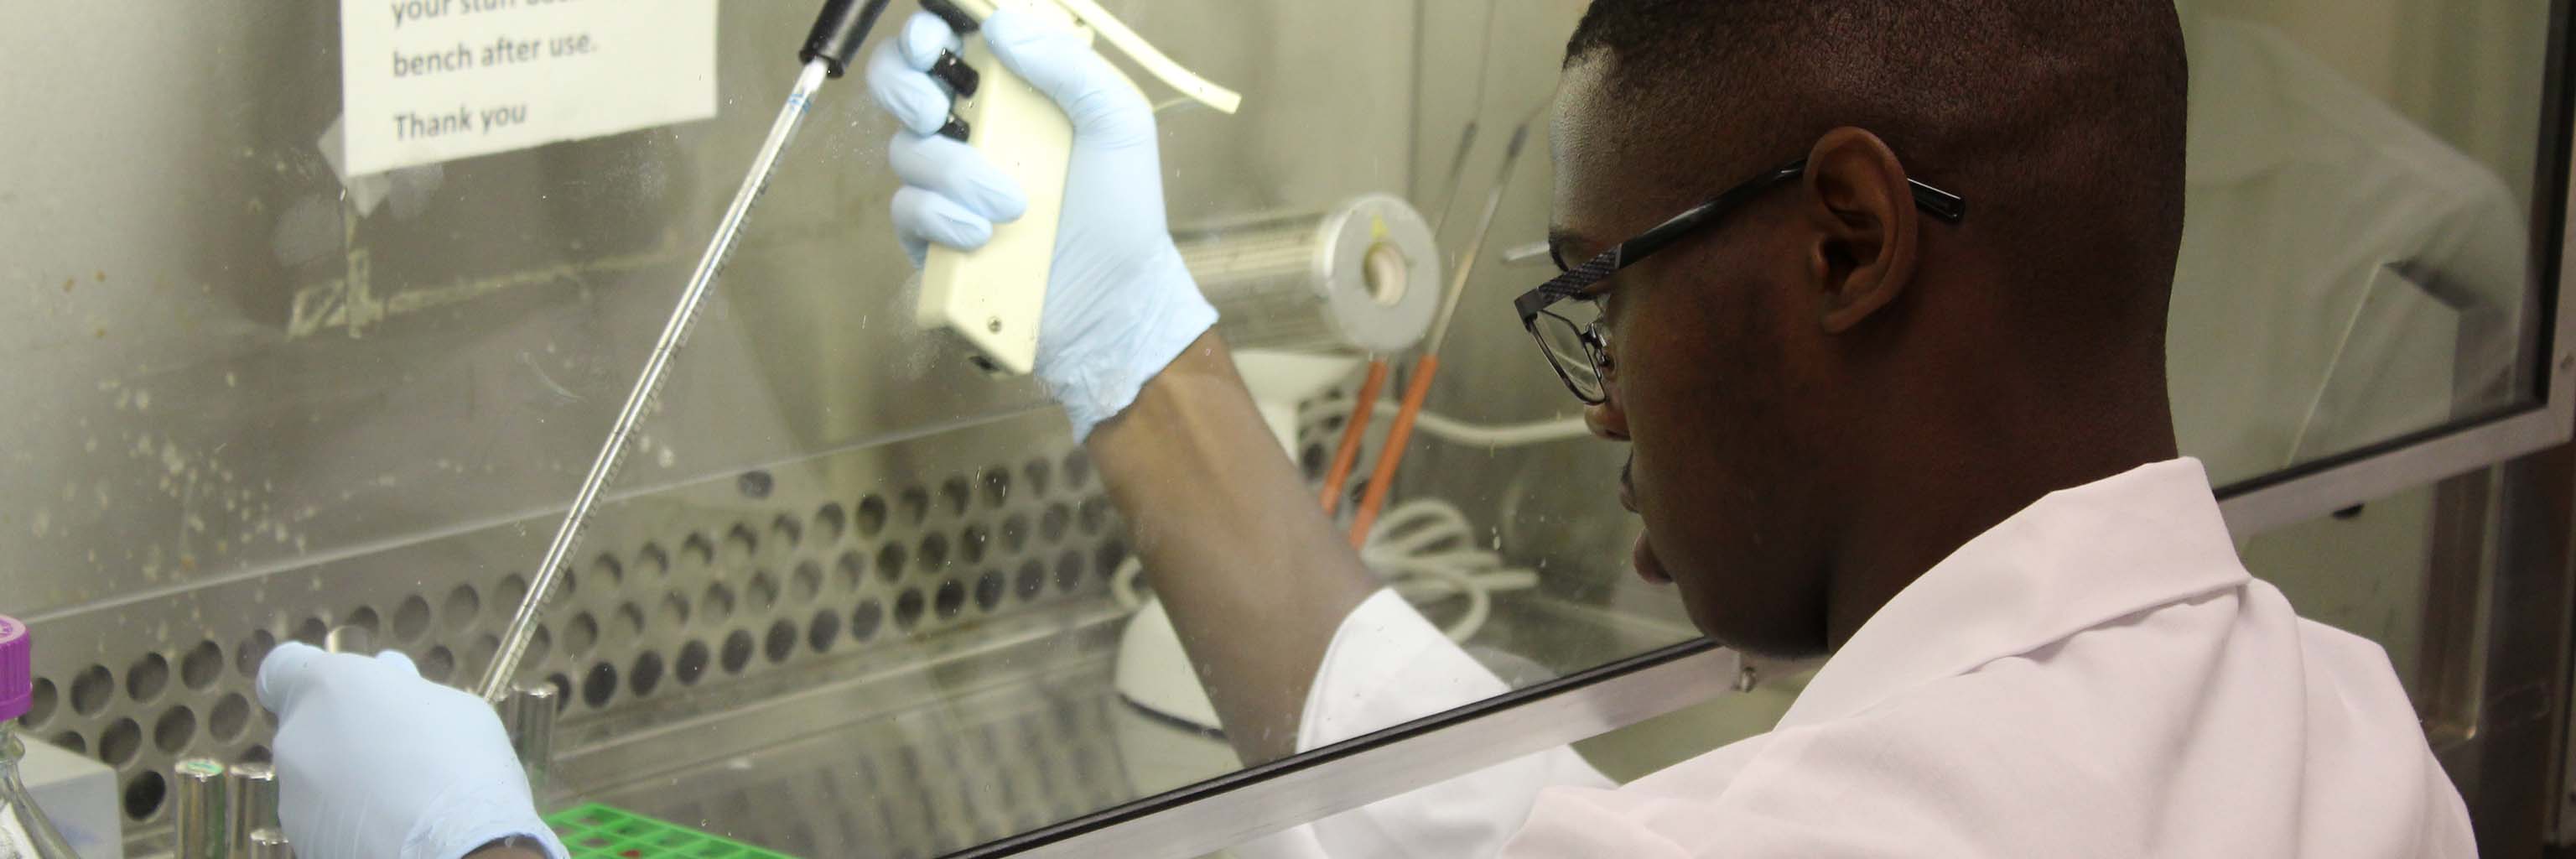 Holland RISE participant working on his experiment under a lab hood.